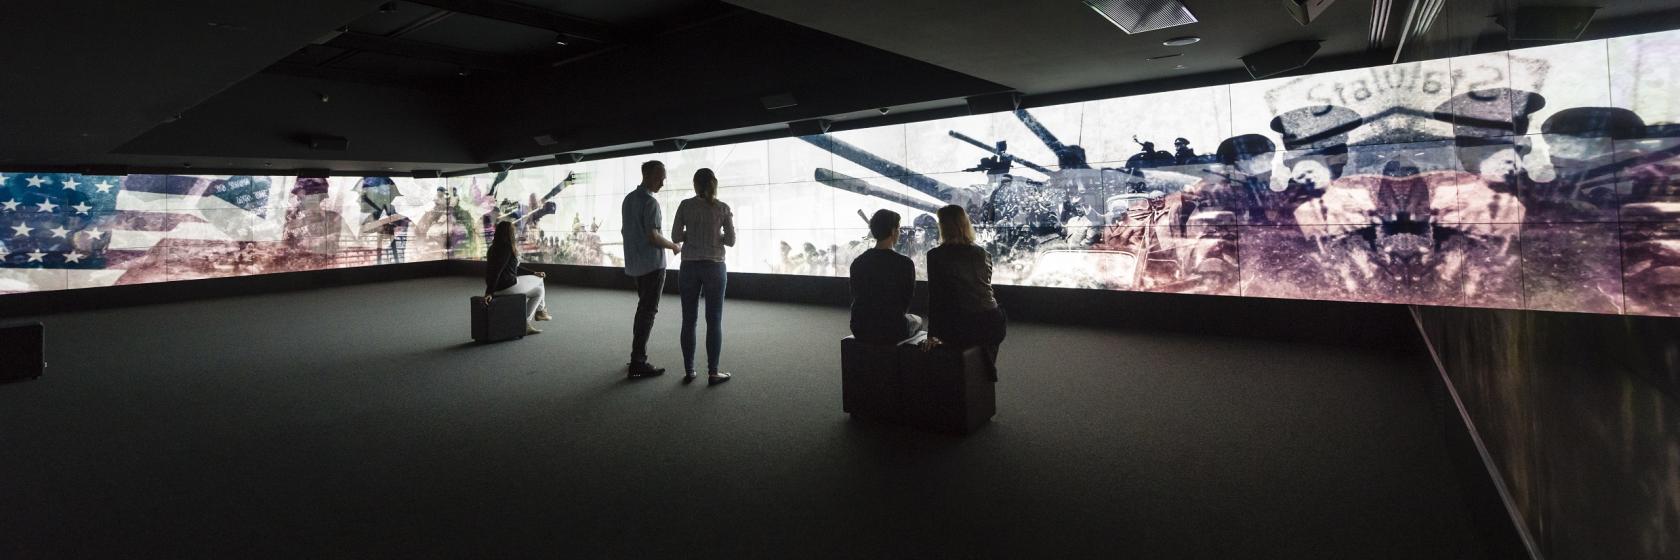 Immersive projection showing